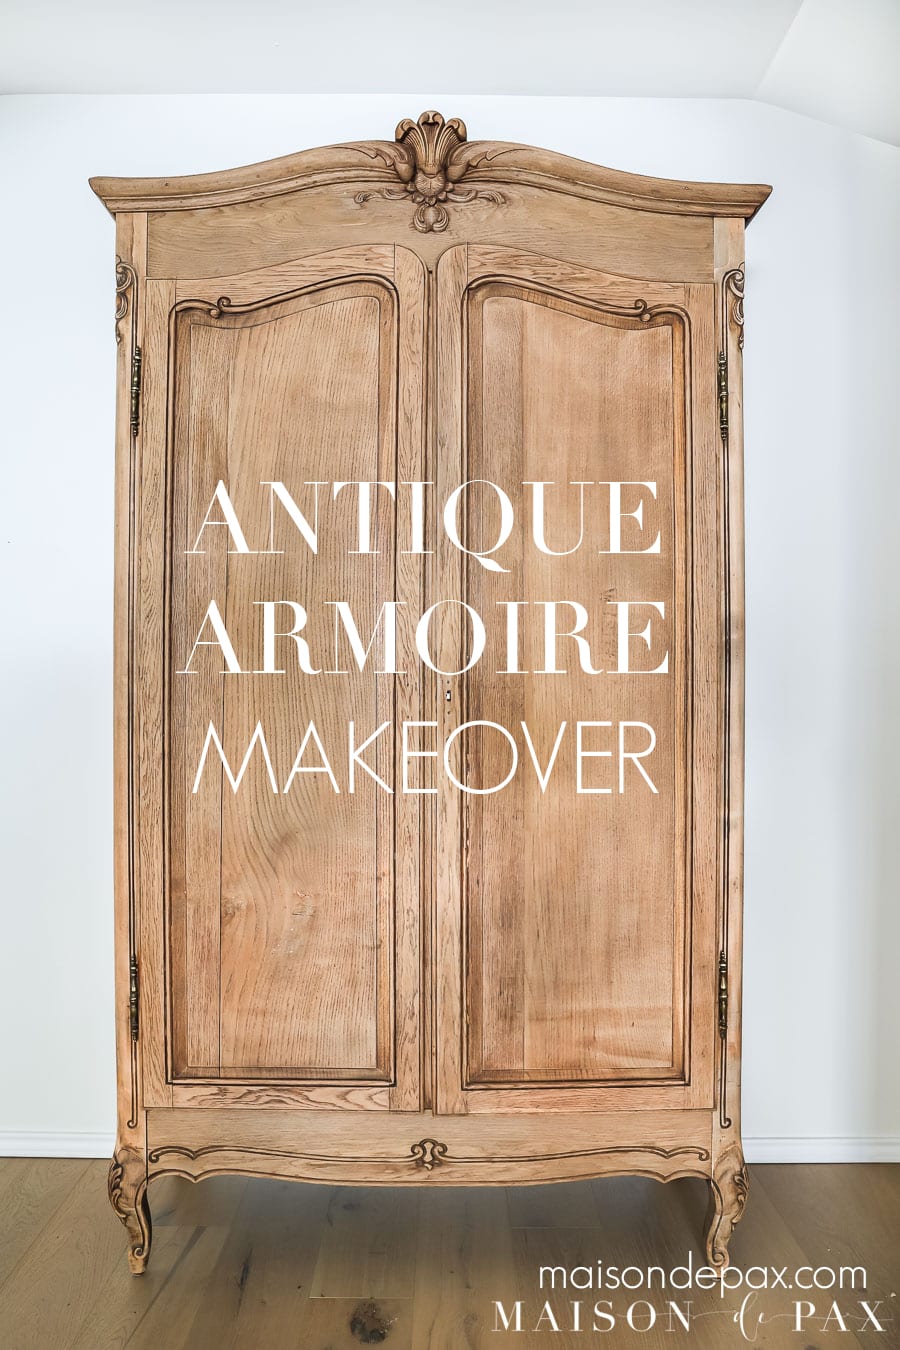 stripped french antique armoire makeover